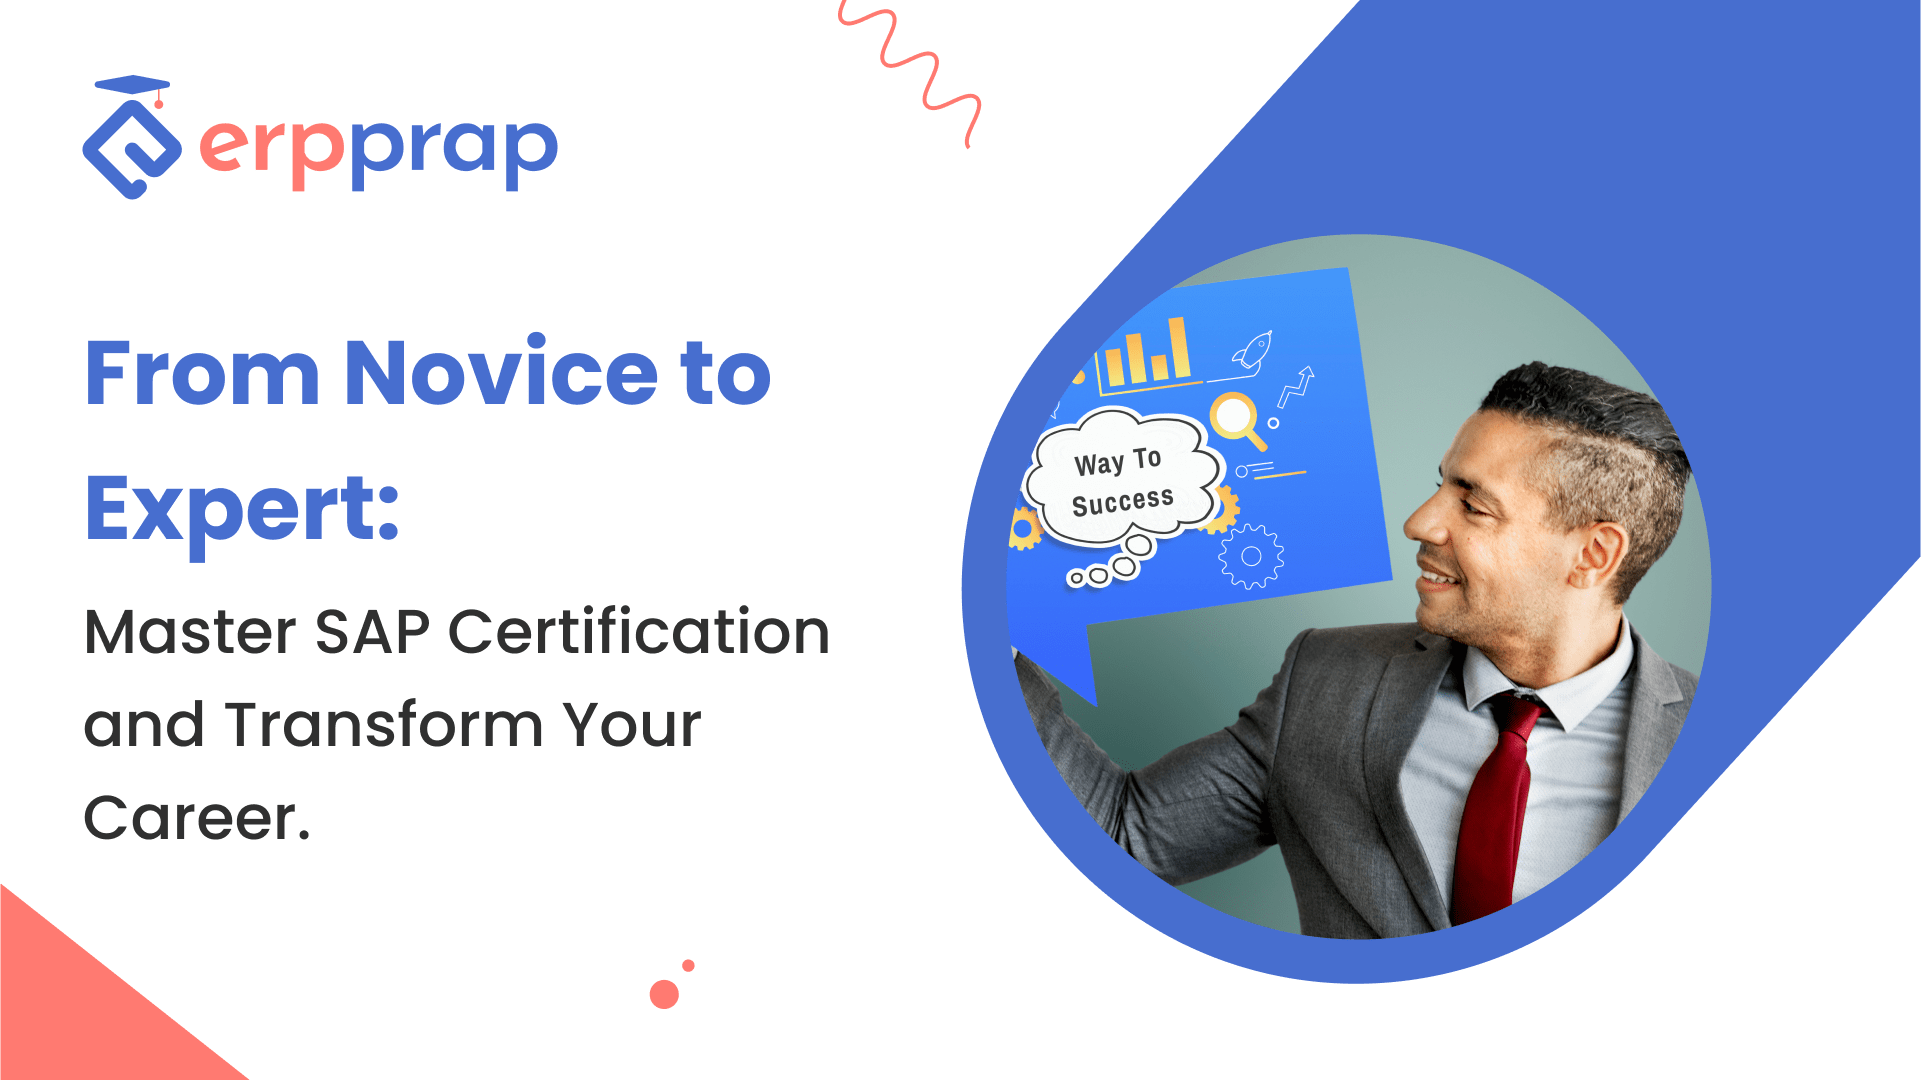 From Novice to Expert Master SAP Certification and Transform Your Career